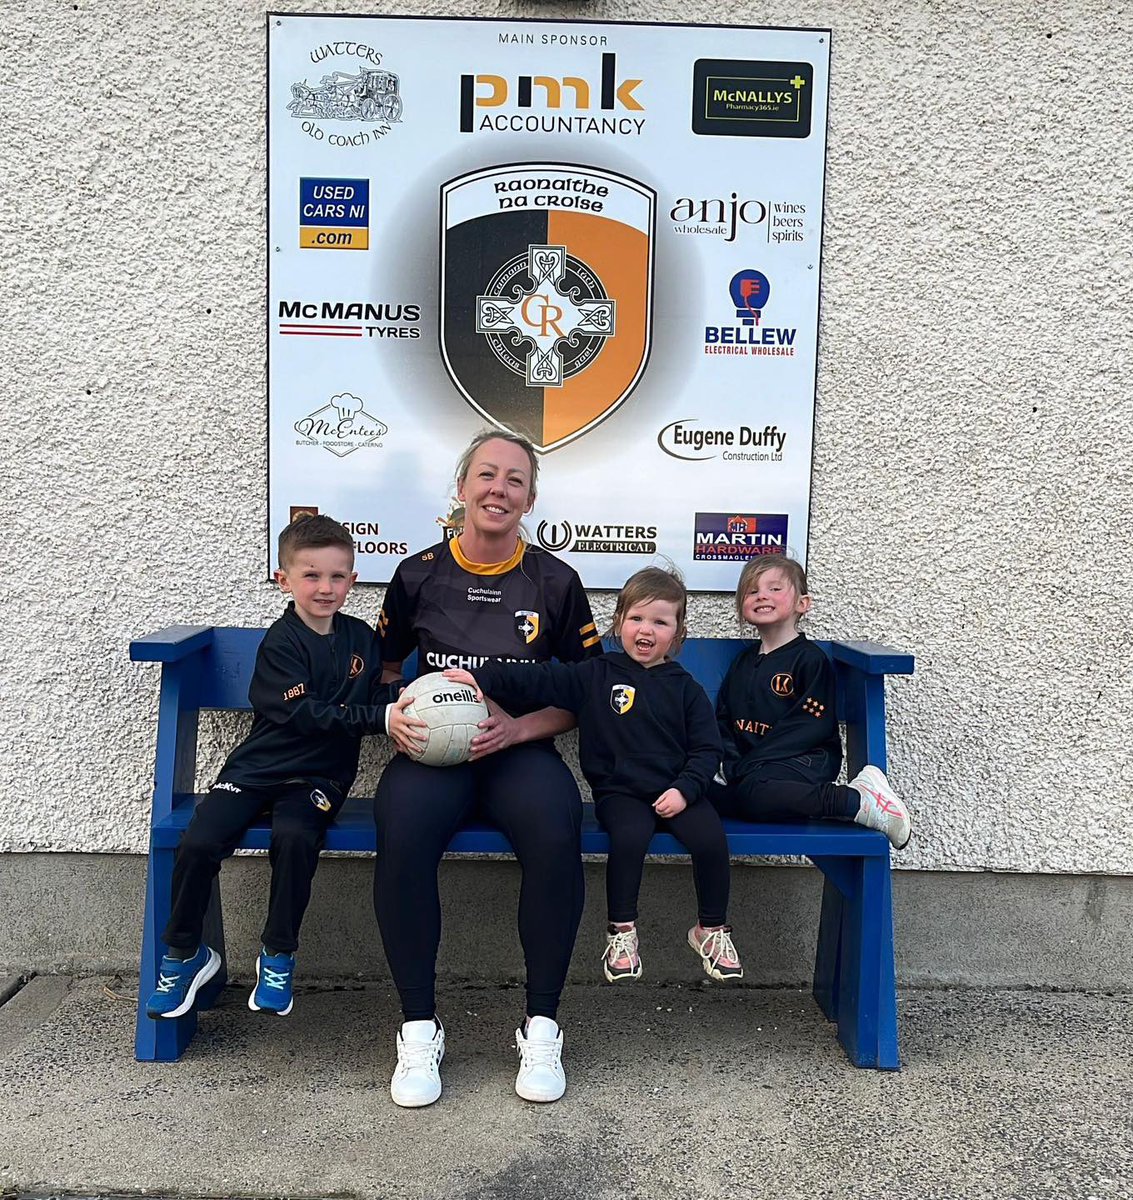 ⭐️⭐️⭐️First to throw in is 3 special little Rangers Dan, Anna & Emma Kernan who will Sponsor The Ball V @ArmaghHarpsGFC @ArmaghLGFA SFL 📅Sat 22nd April ⏰7pm 📍Main Field. 🏐The Kernan family presented the ball, Team Captain, Sinead Boyle ⭐️Thanks @TonyKernan Sinead & family.